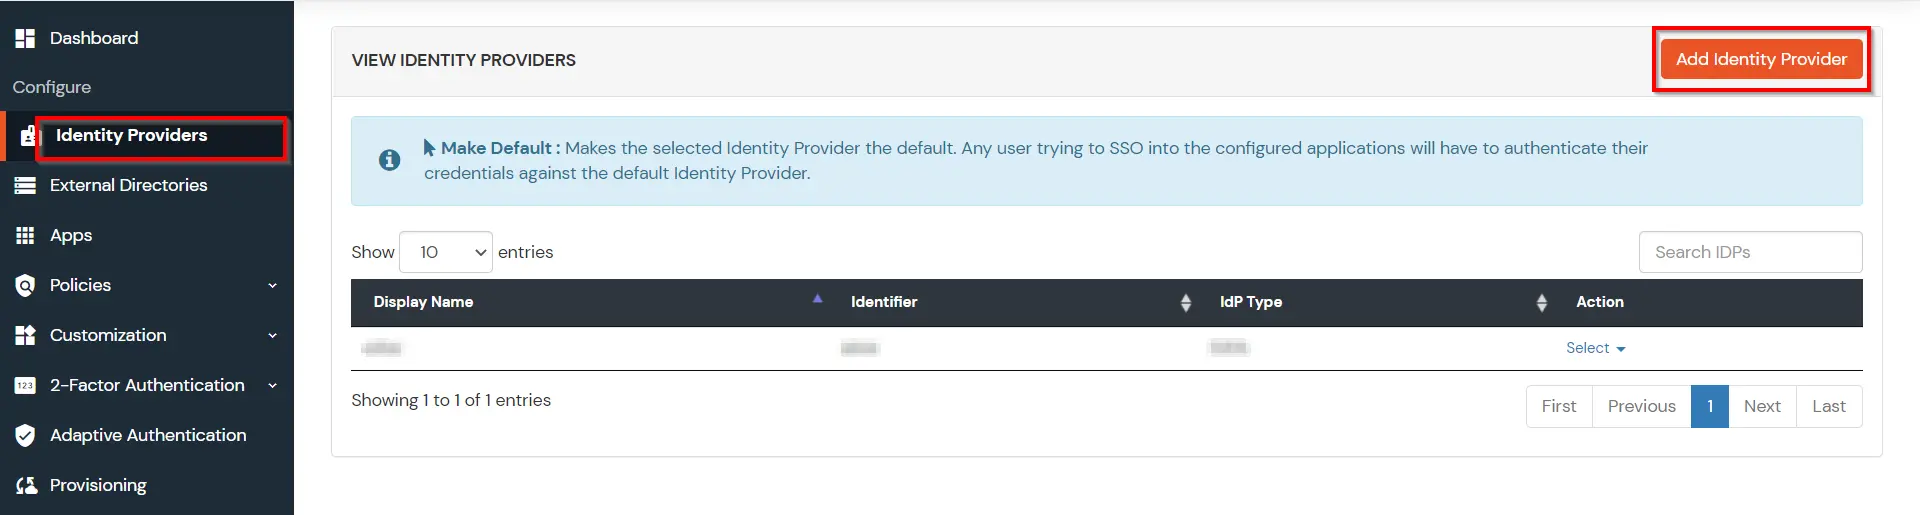 Add Identity Provider for Oracle EBS Ping SSO